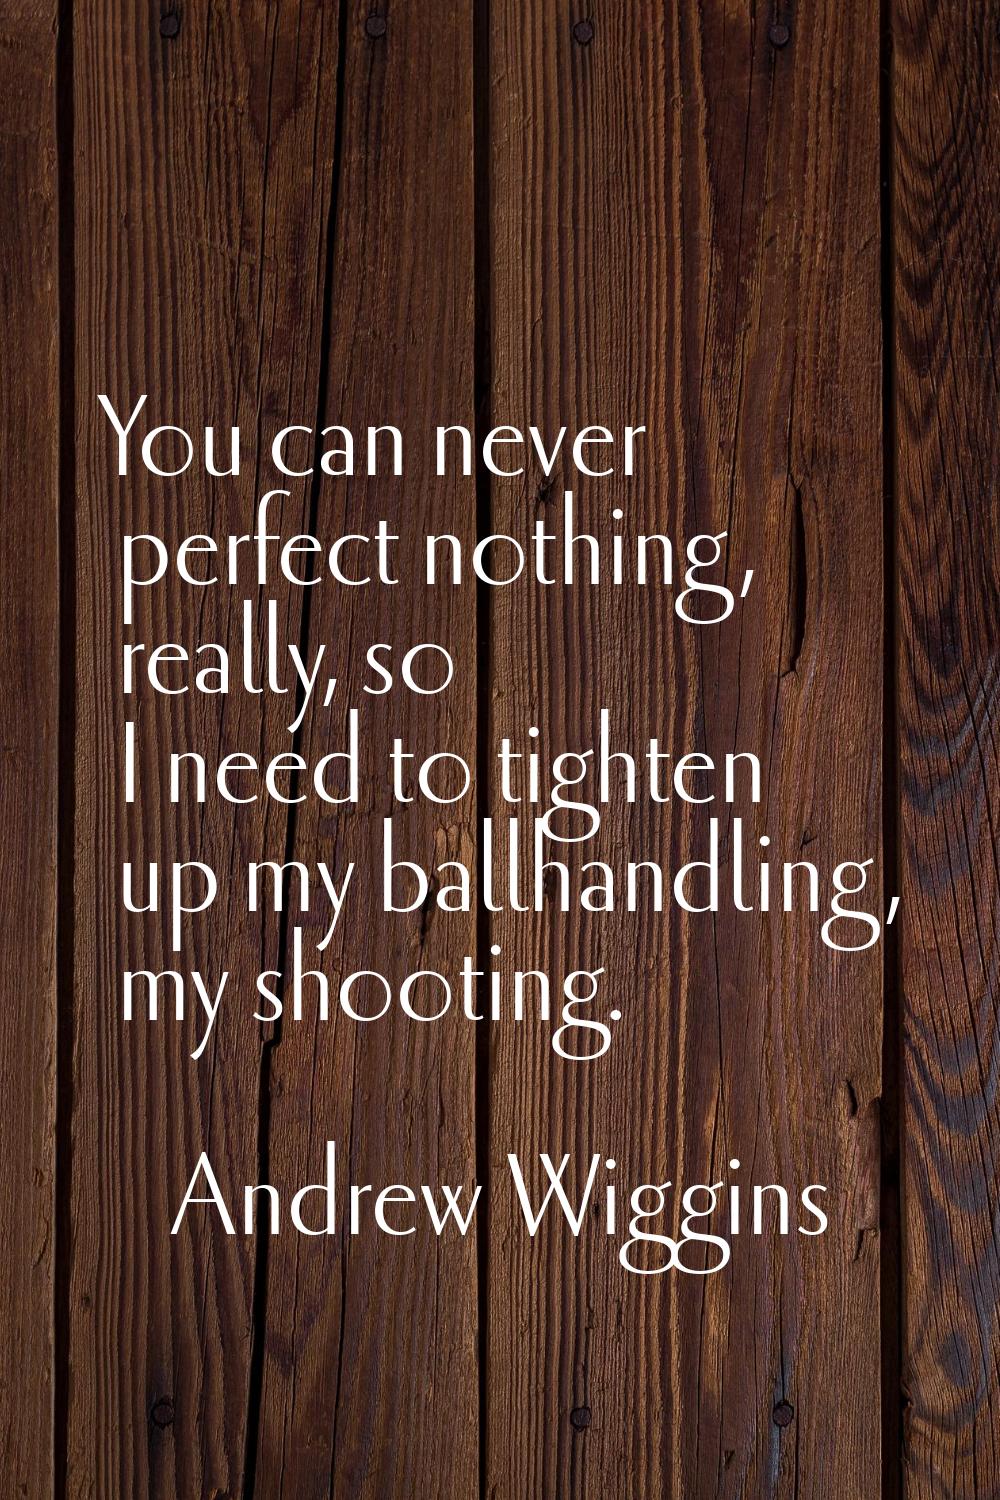 You can never perfect nothing, really, so I need to tighten up my ballhandling, my shooting.